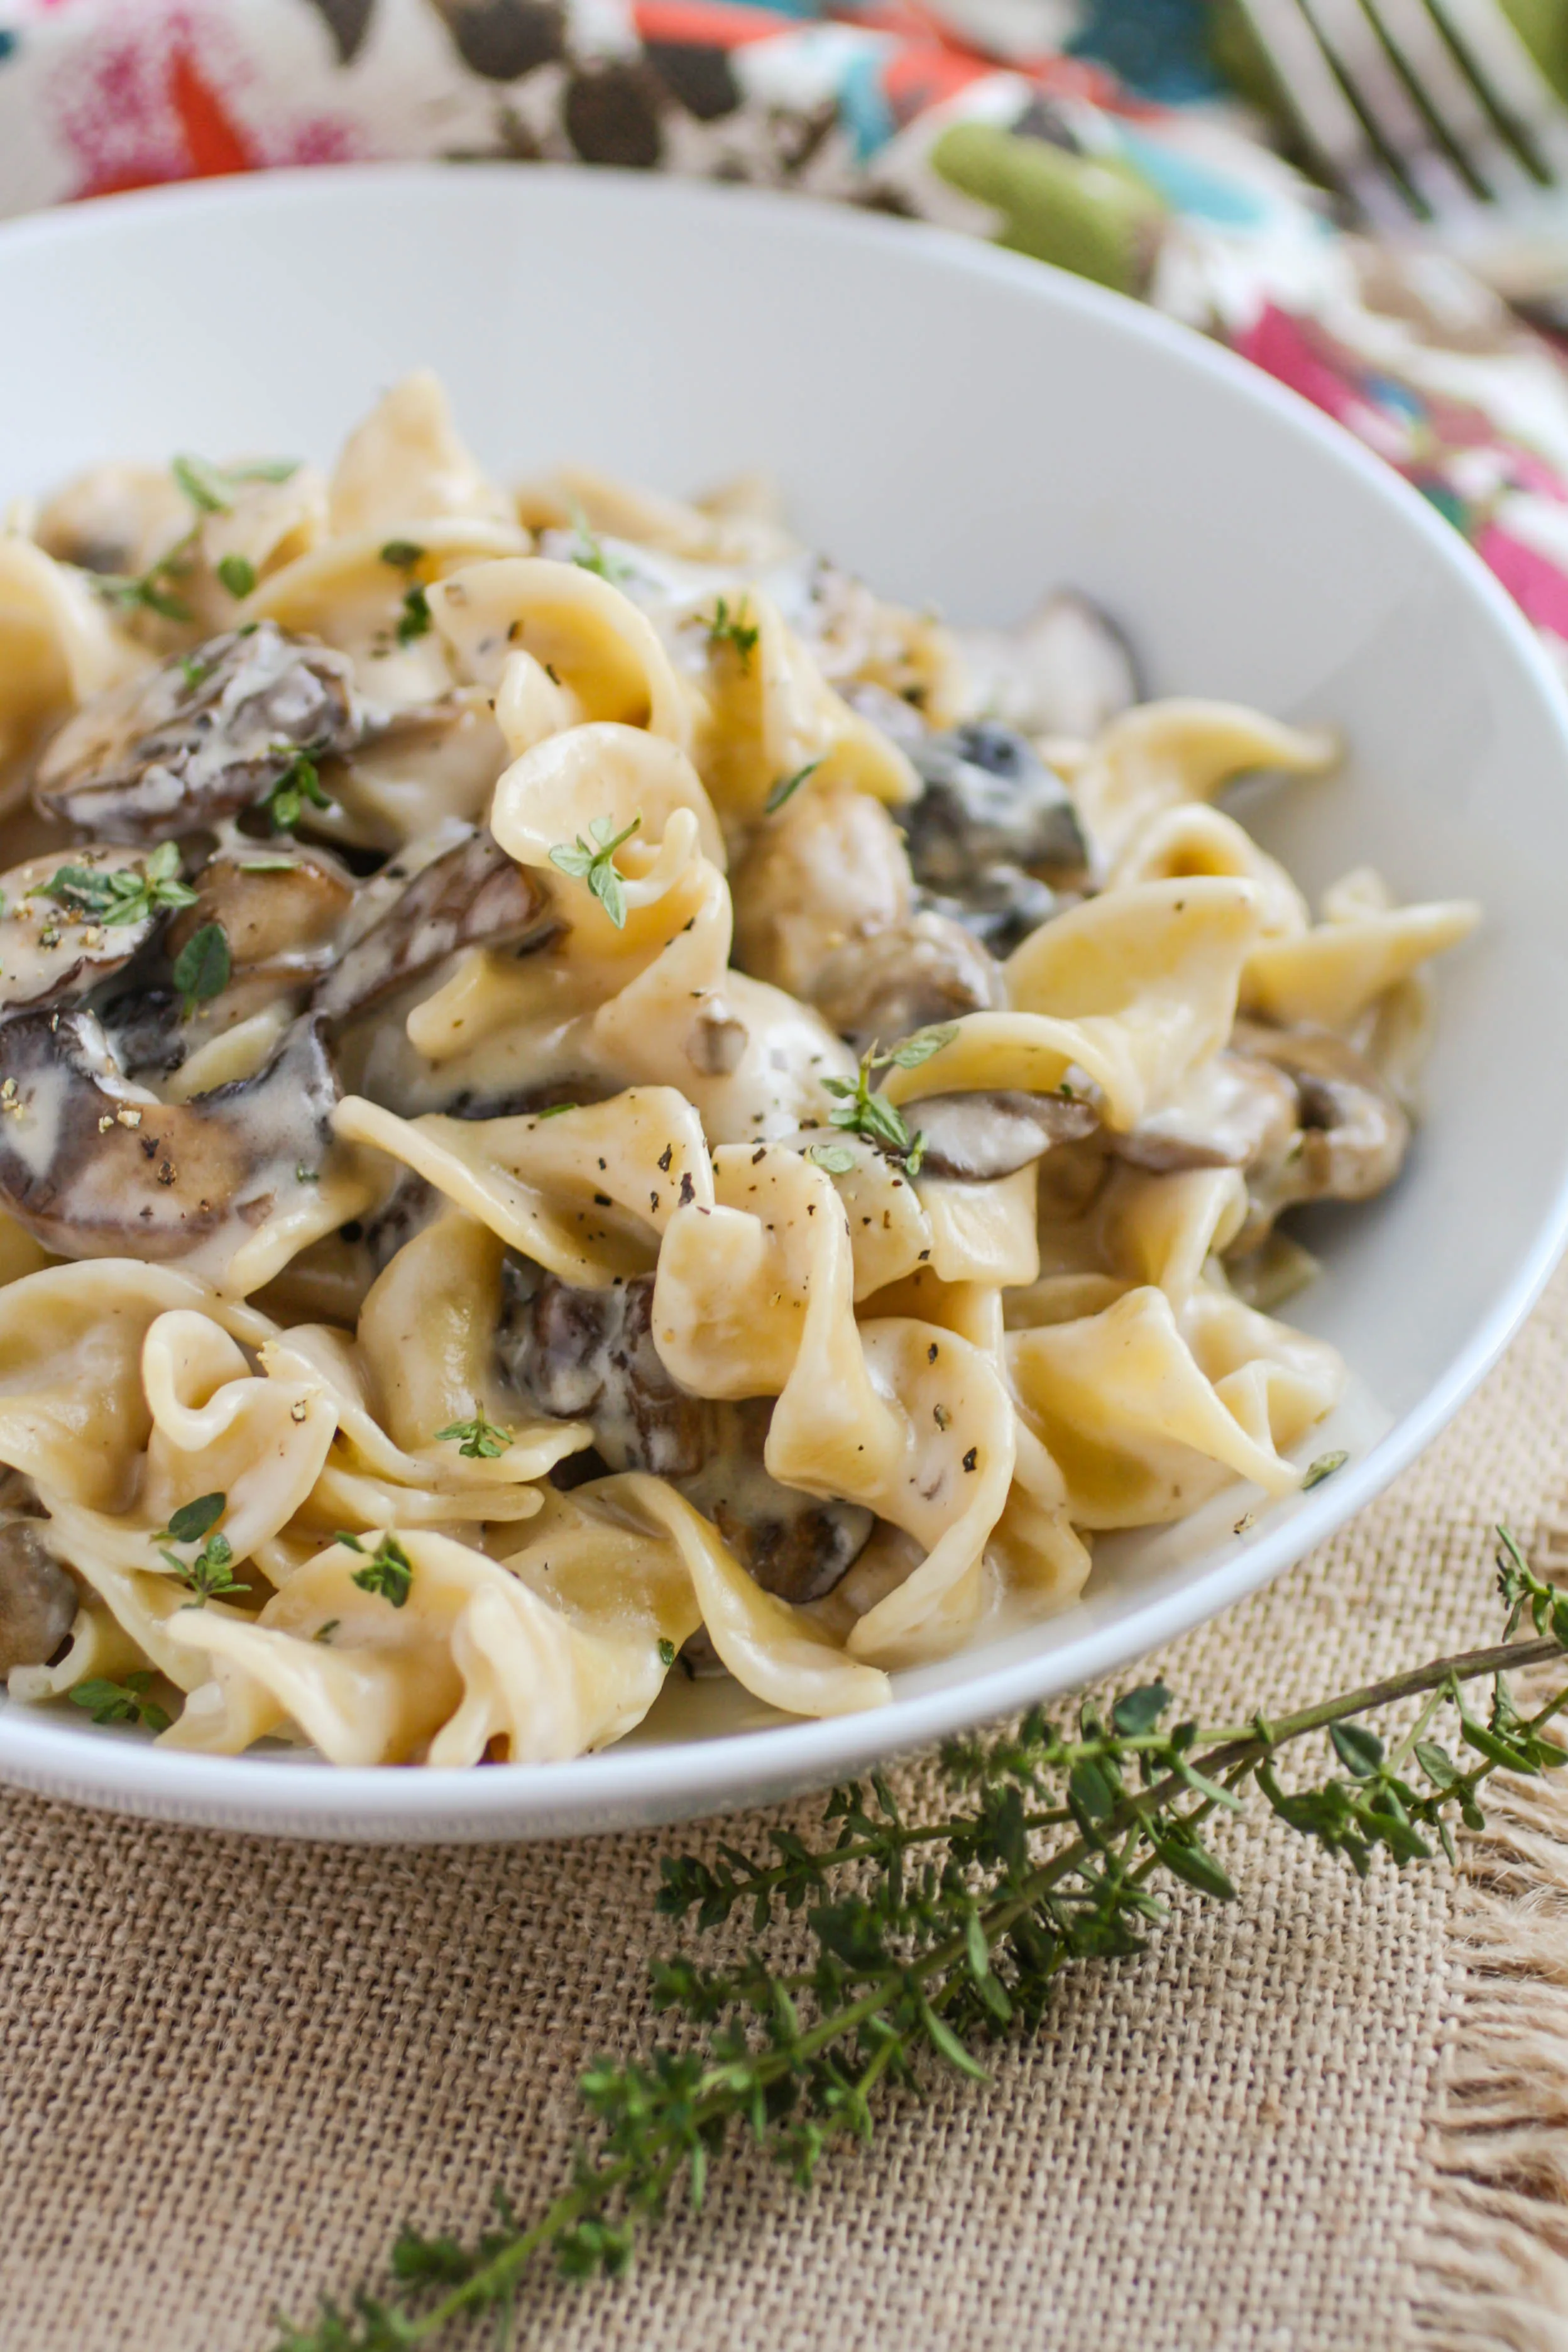 Mushroom Stroganoff makes a comforting, filling, and flavorful vegetarian meal. You'll love these noodles mixed with mushrooms and a creamy sauce.